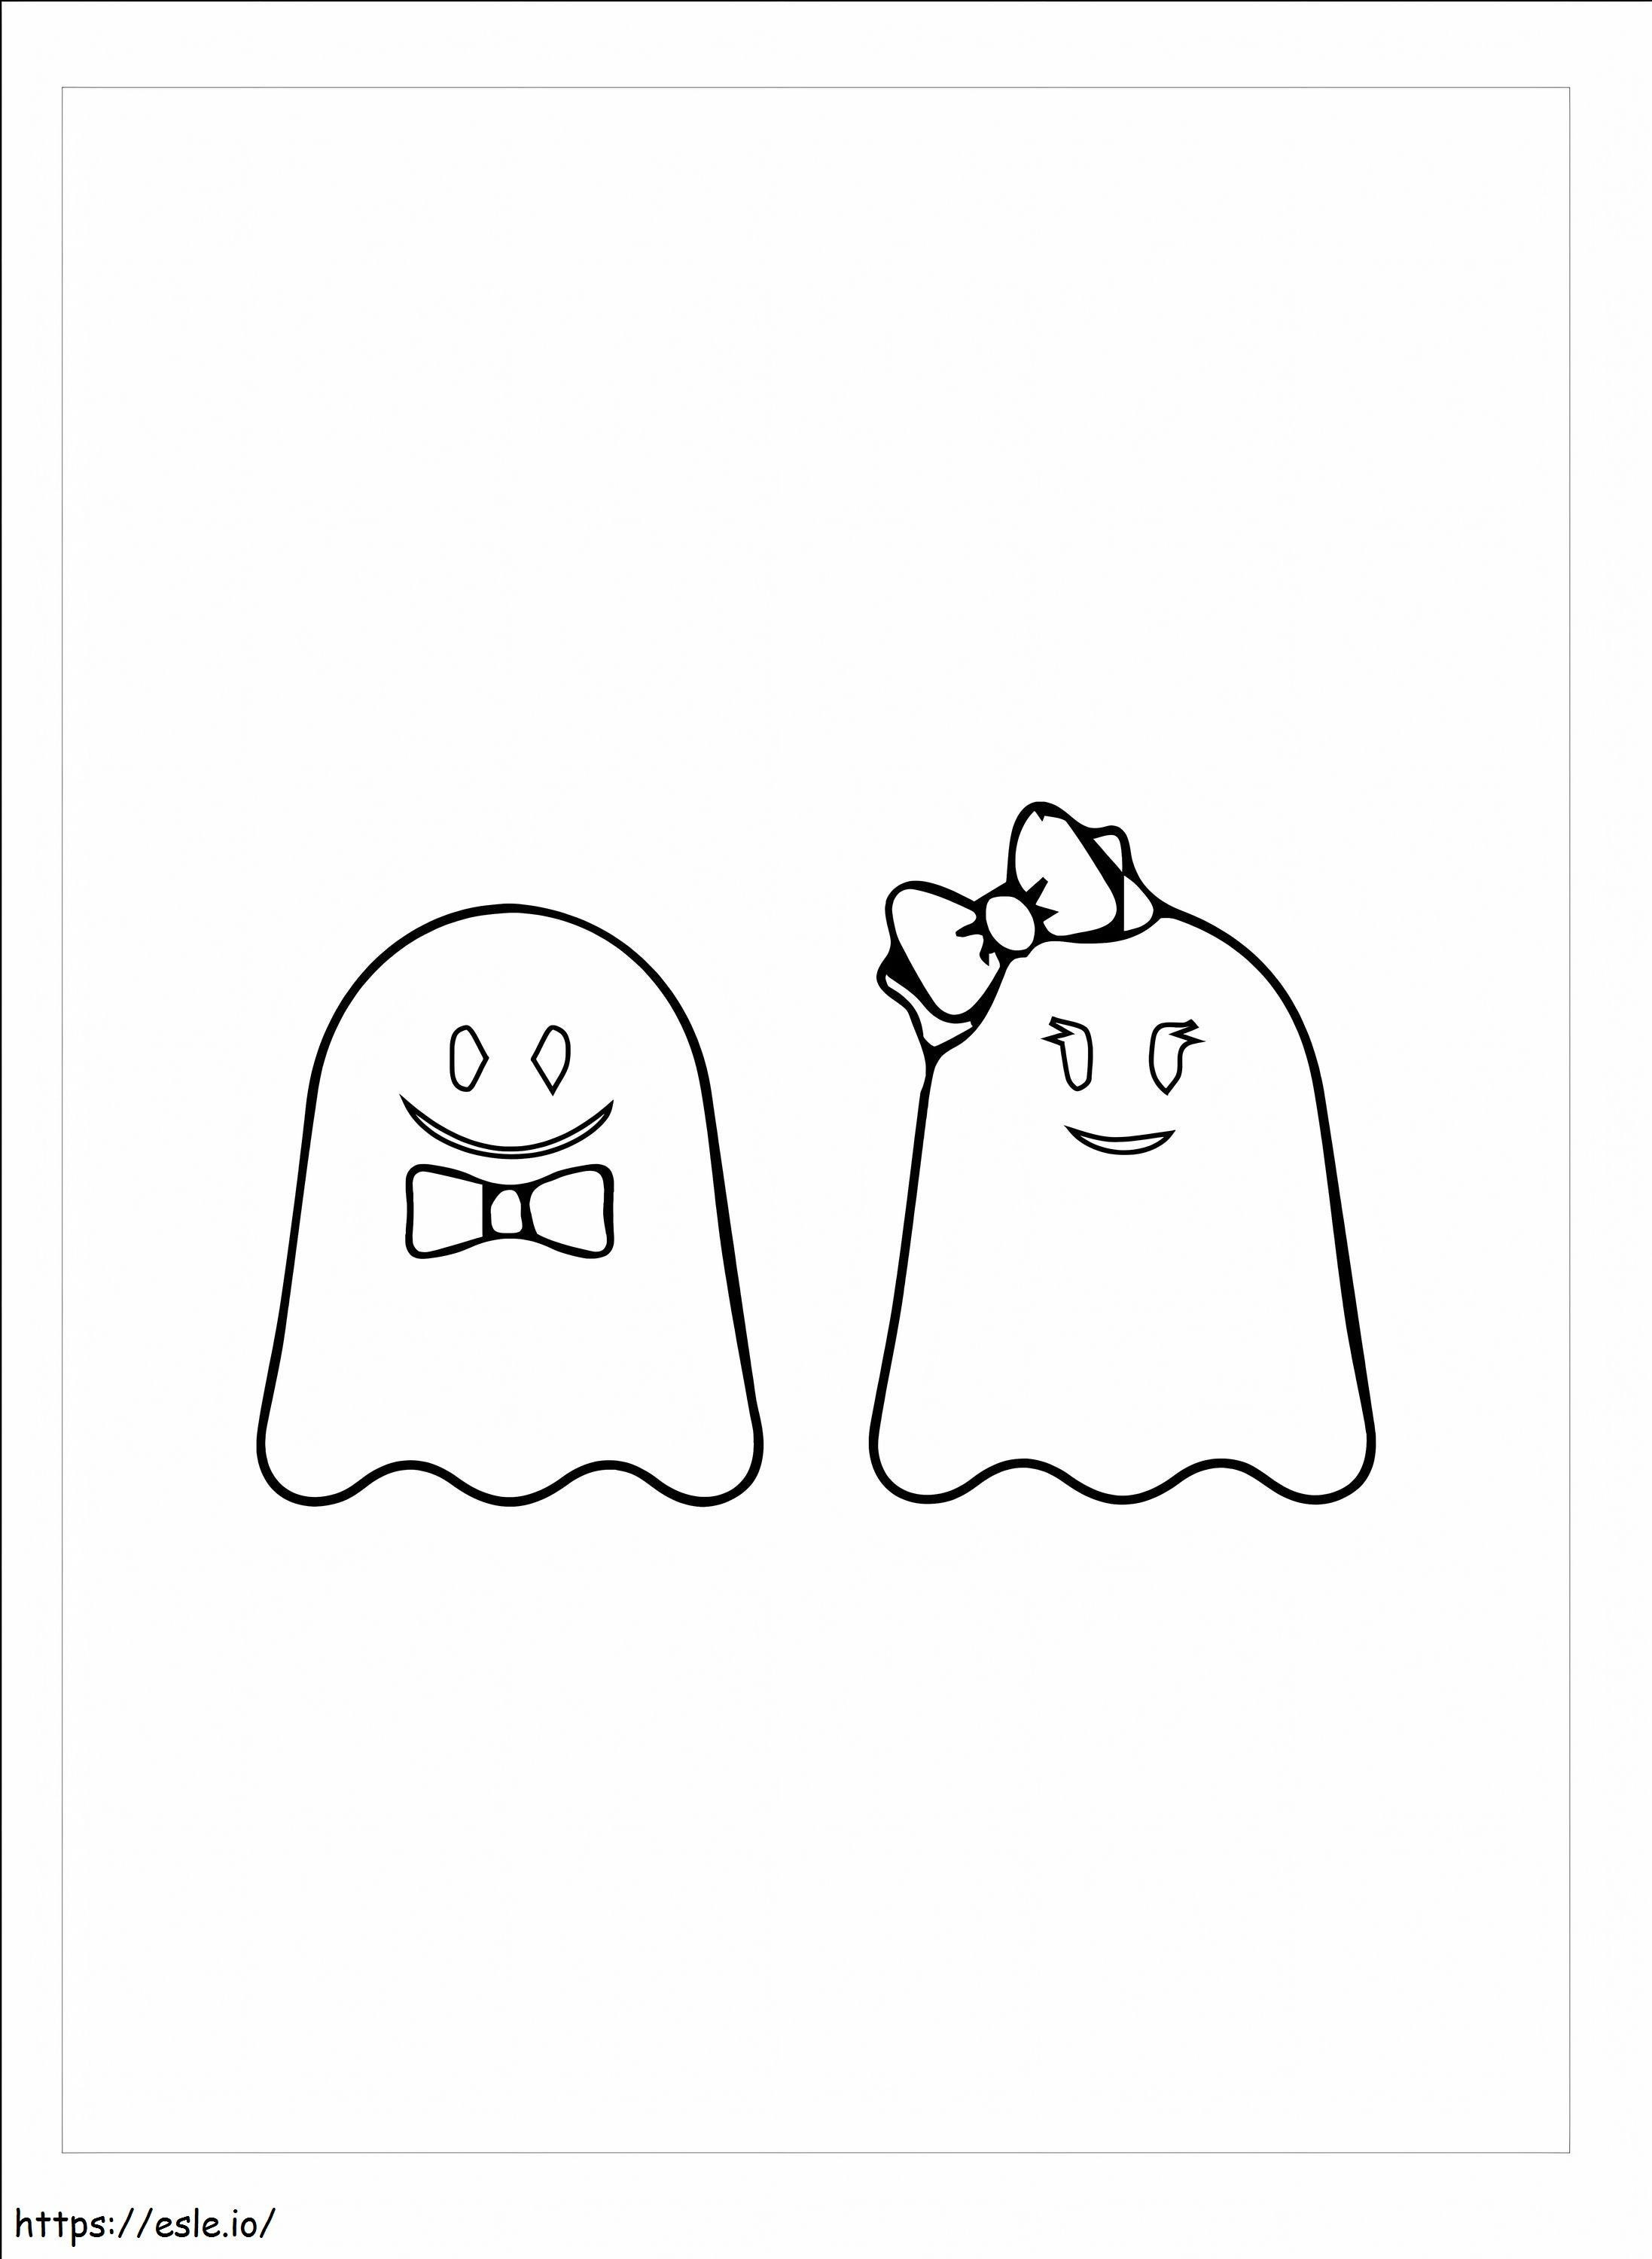 Cute Ghost Couple coloring page